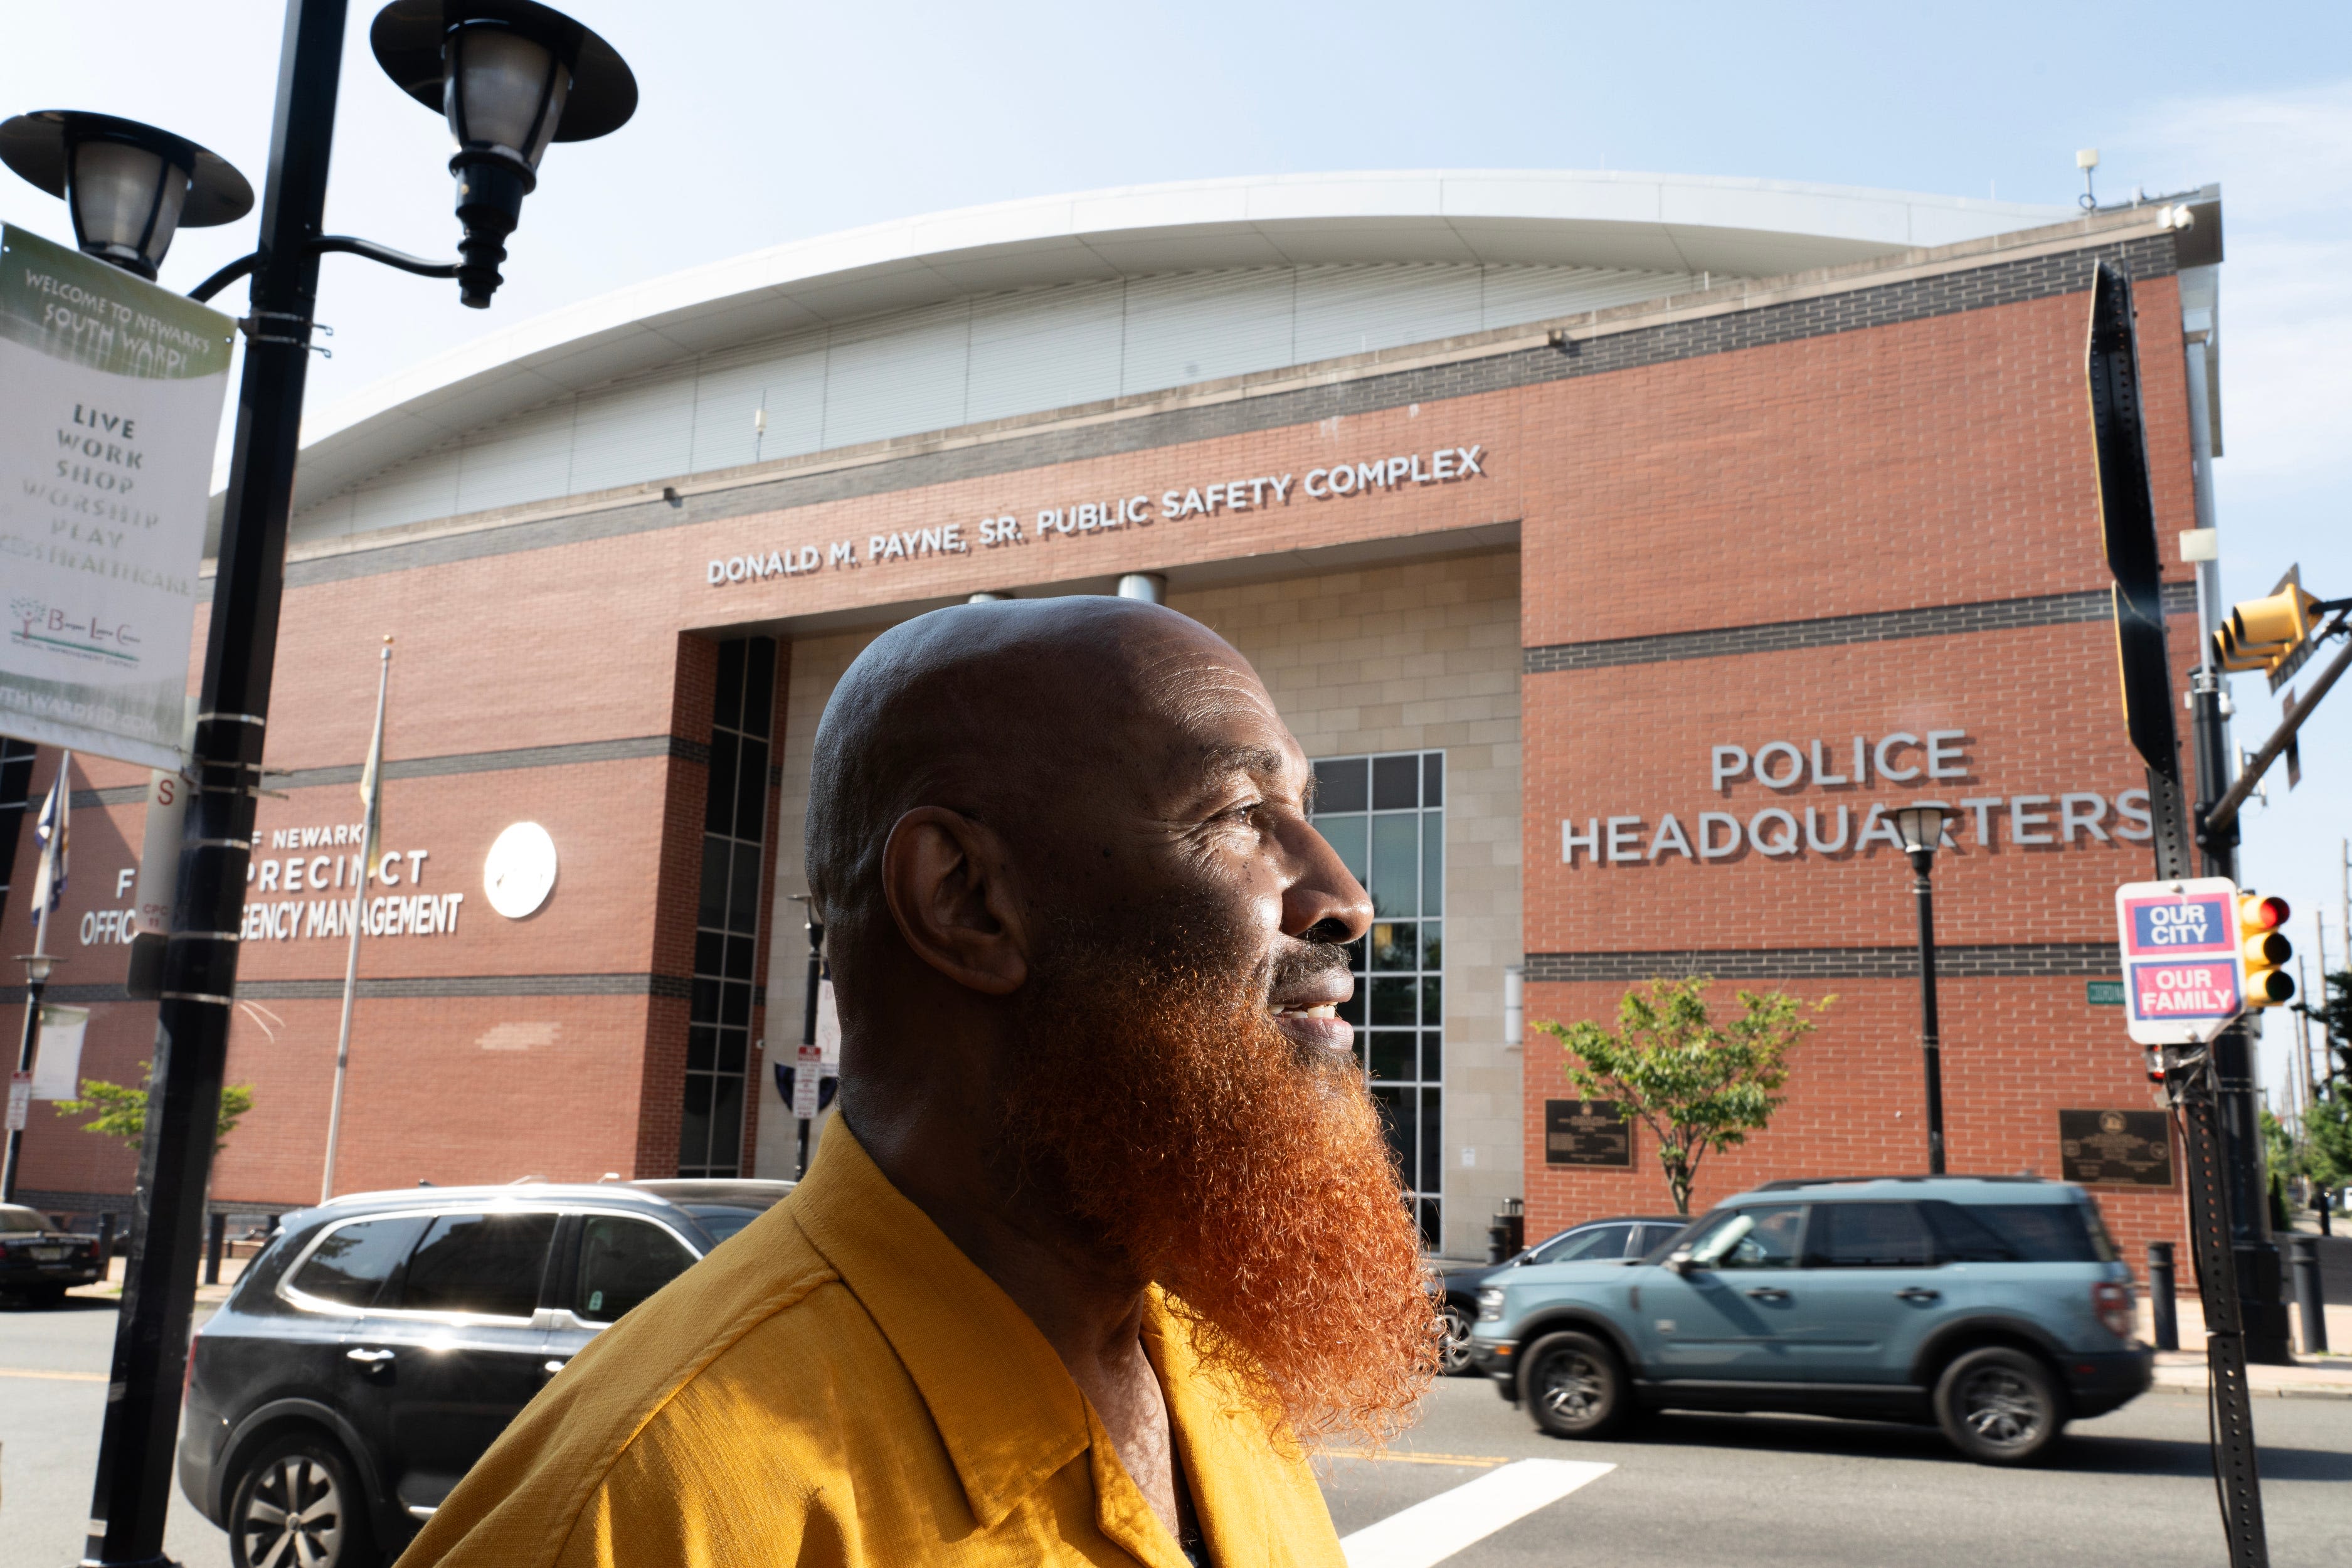 Police officers with religious garb, beards find protections in the law